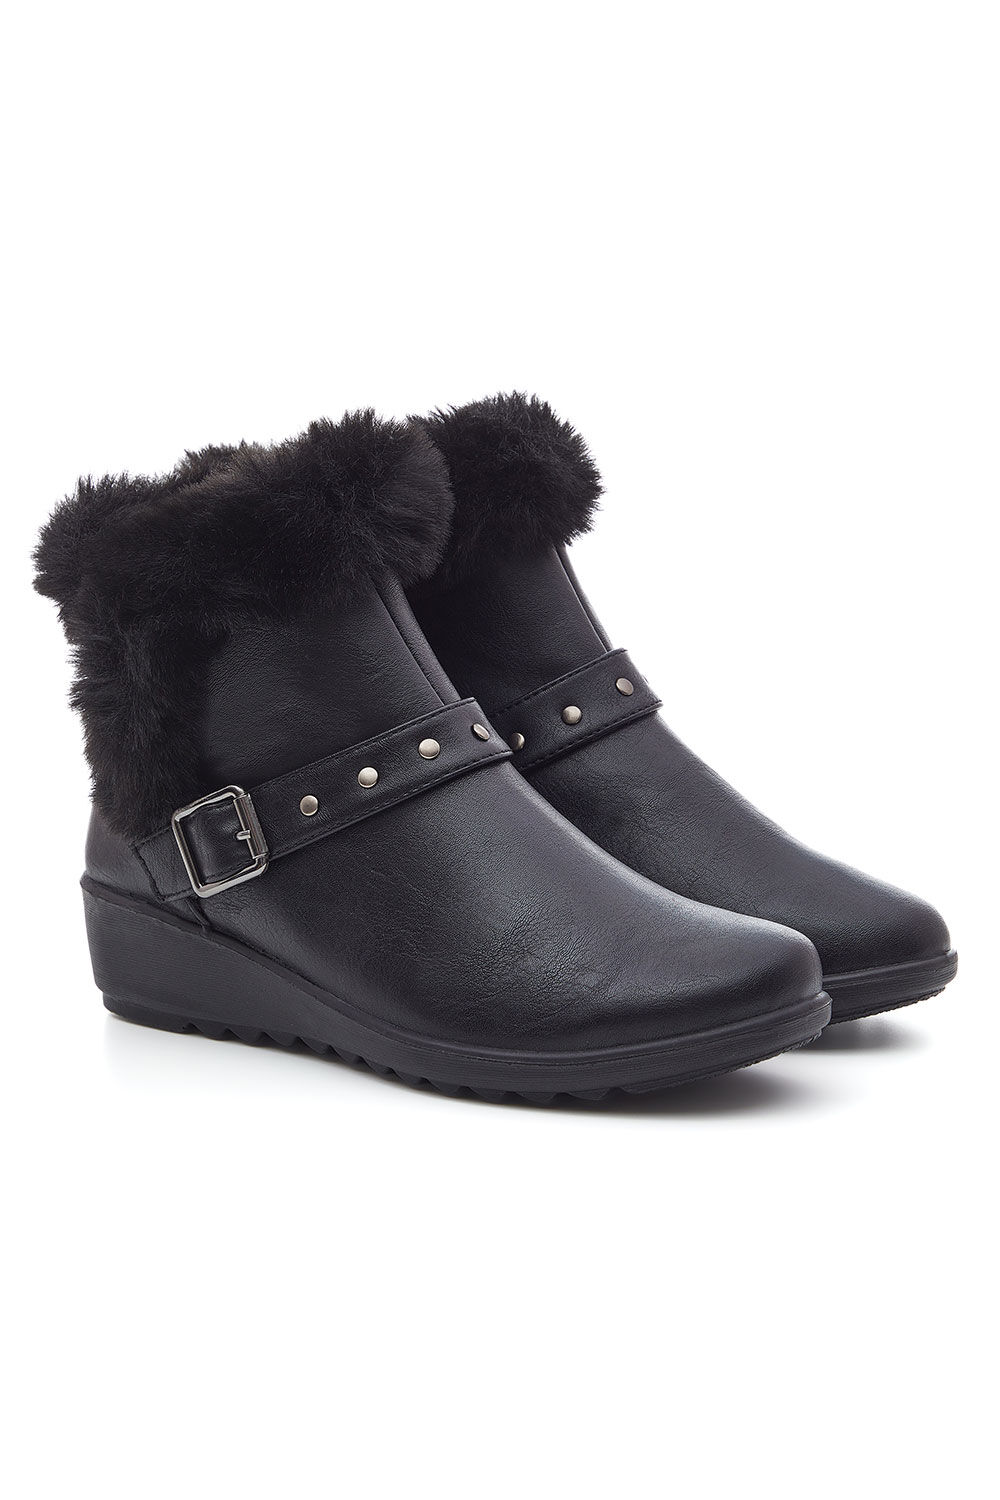 Cushion Walk Black - Buckle and Strap Boots With Fur Trim, Size: 4